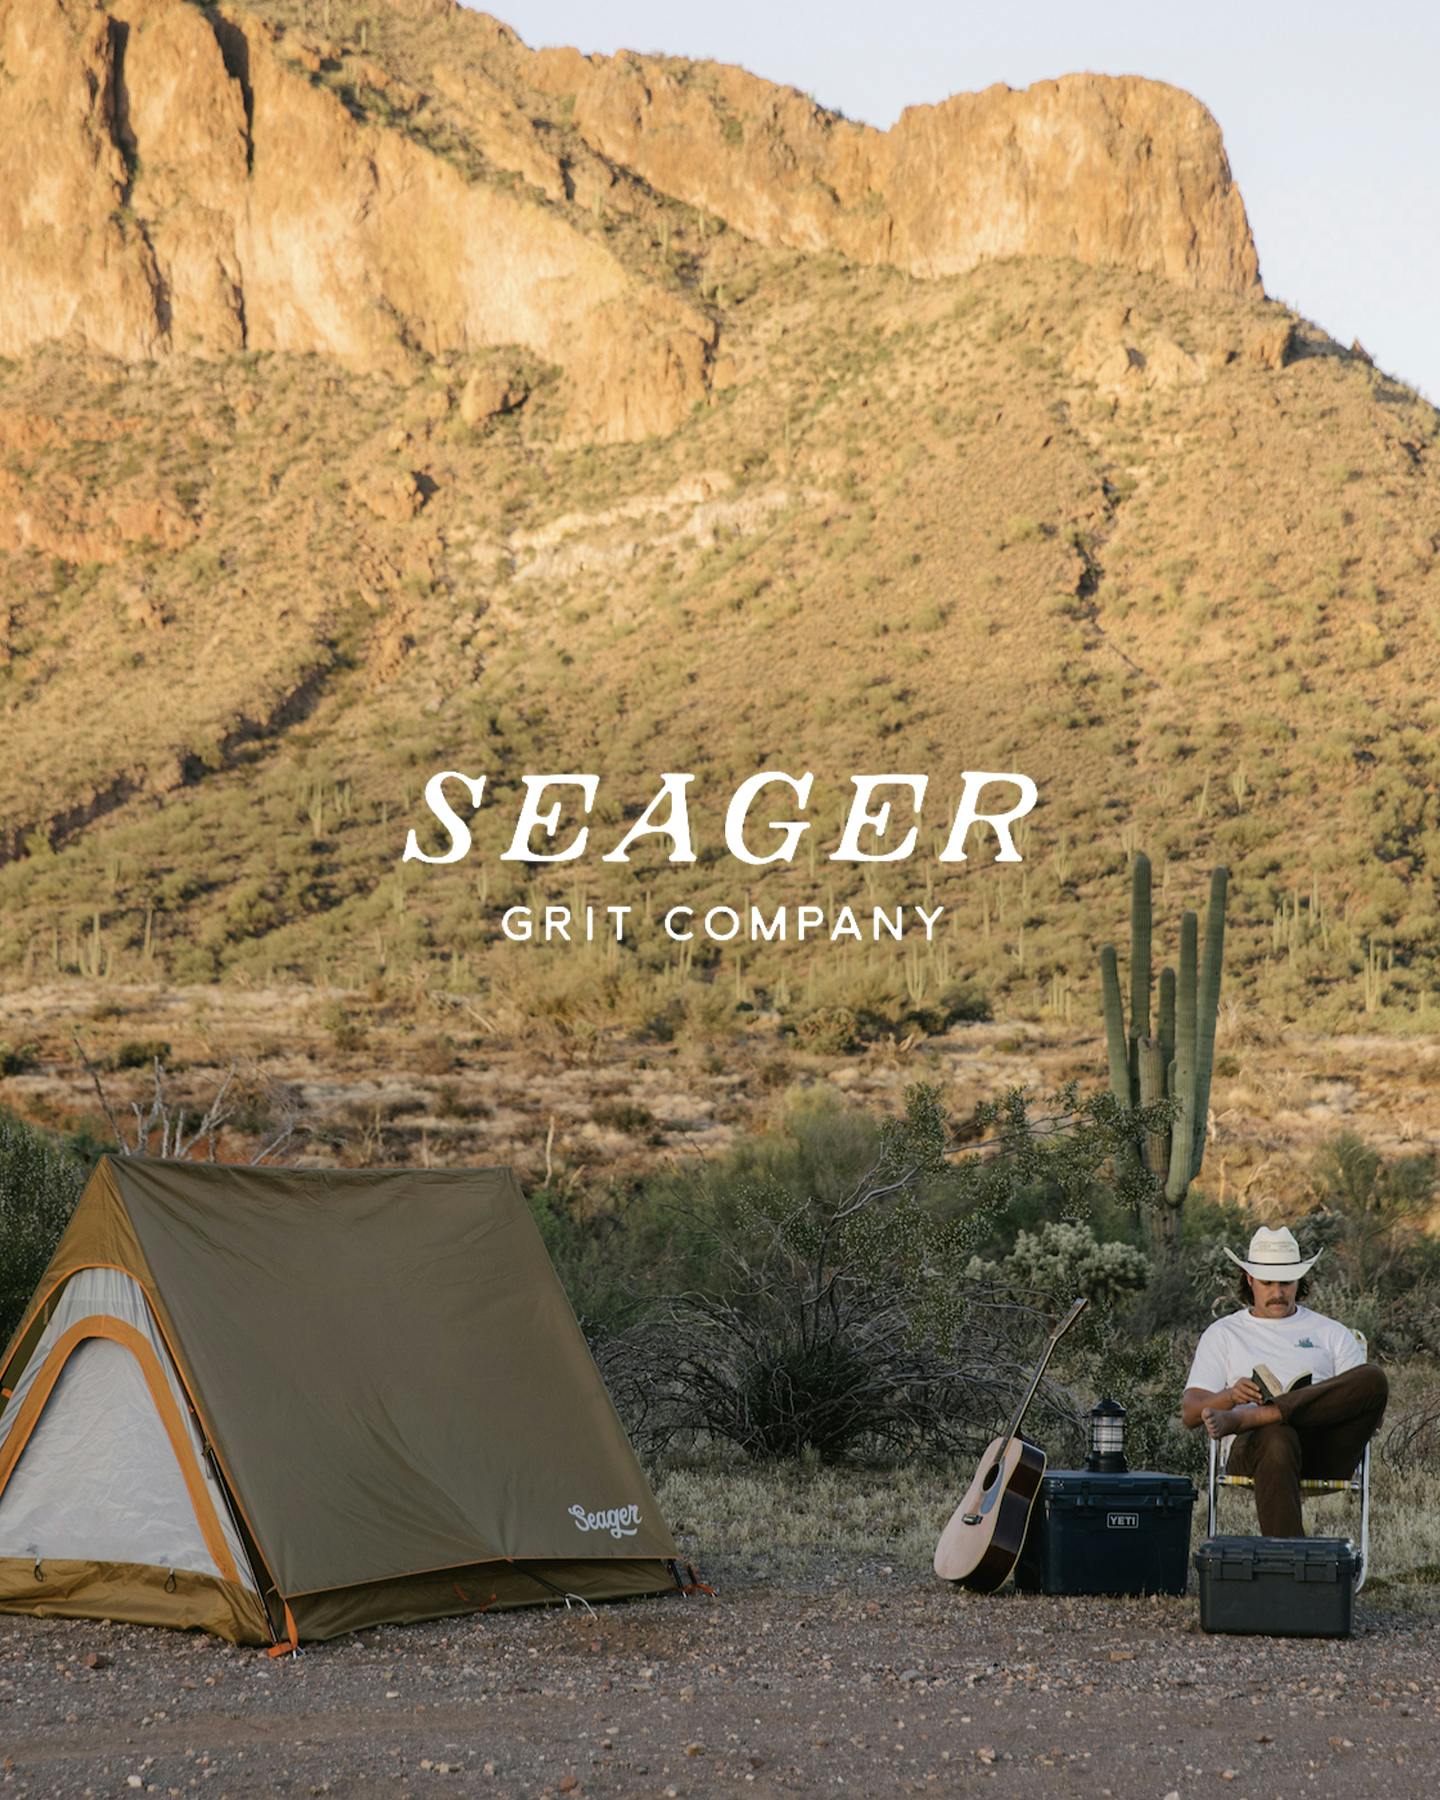 Man sitting in chair outdoors with Seager camping tent